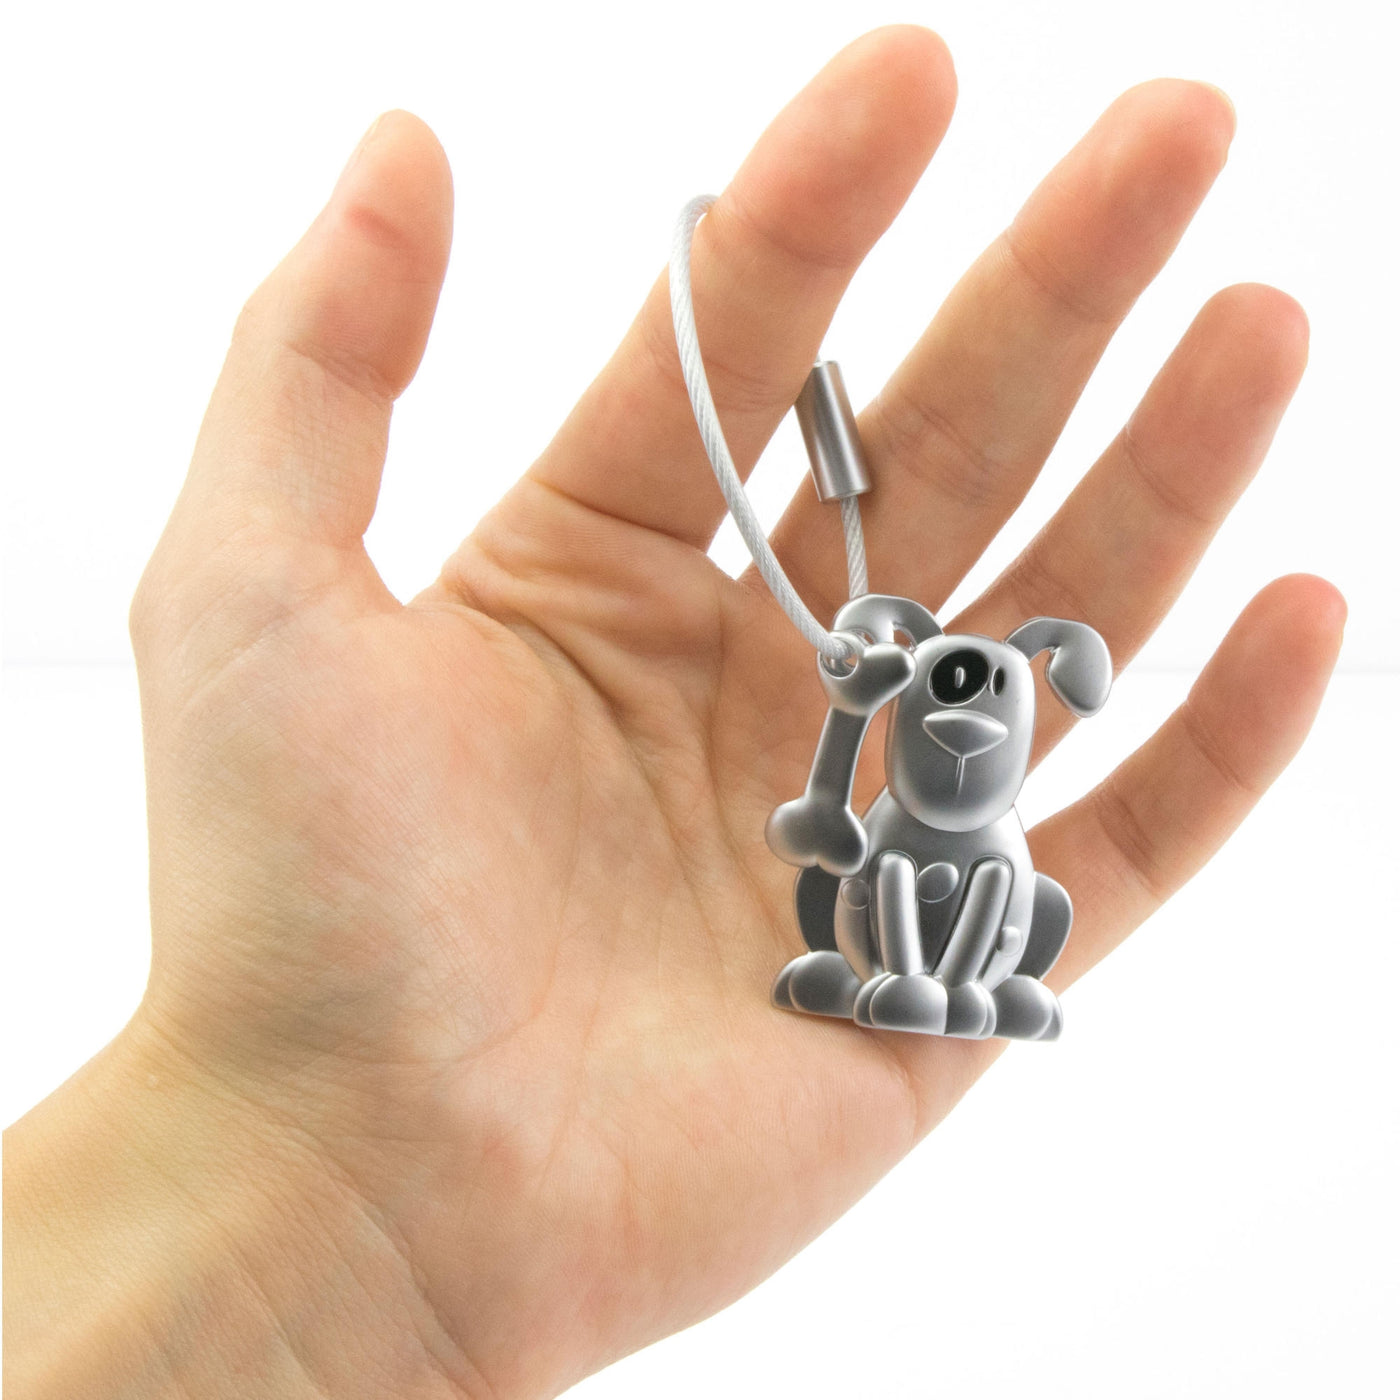 Troika Pete the Dog, Charm Key Chain with Nail Friendly Loop